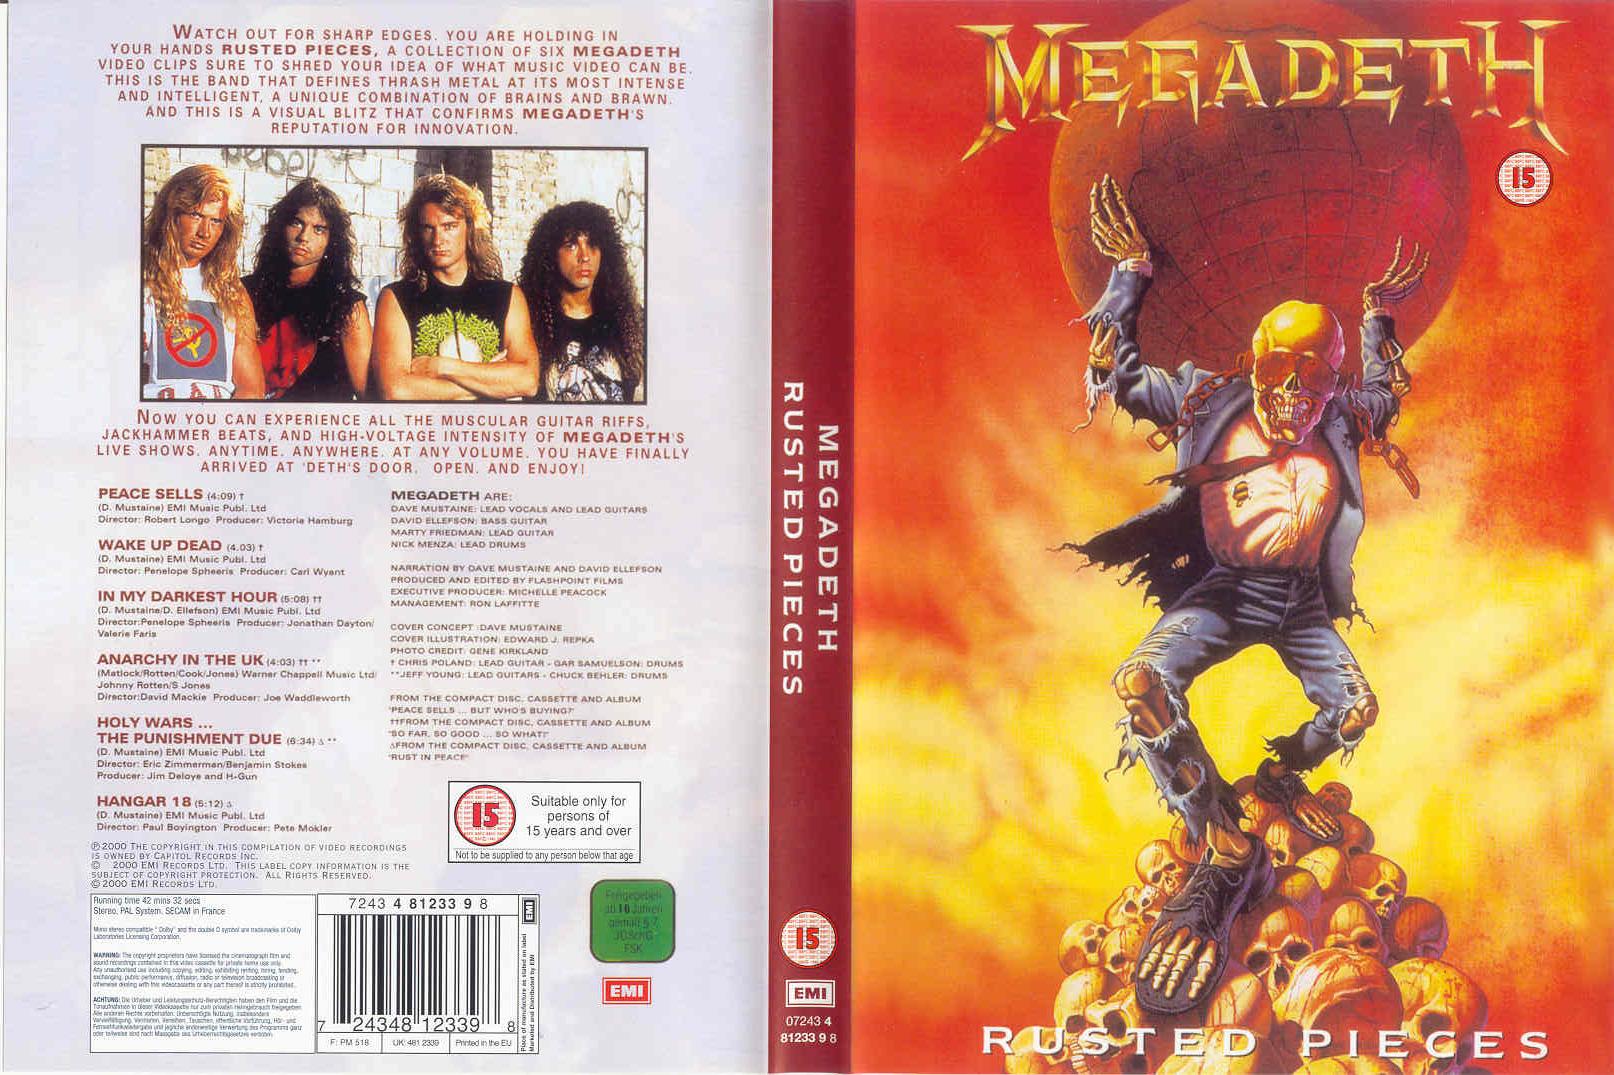 Jaquette DVD Megadeth Rusted Pieces